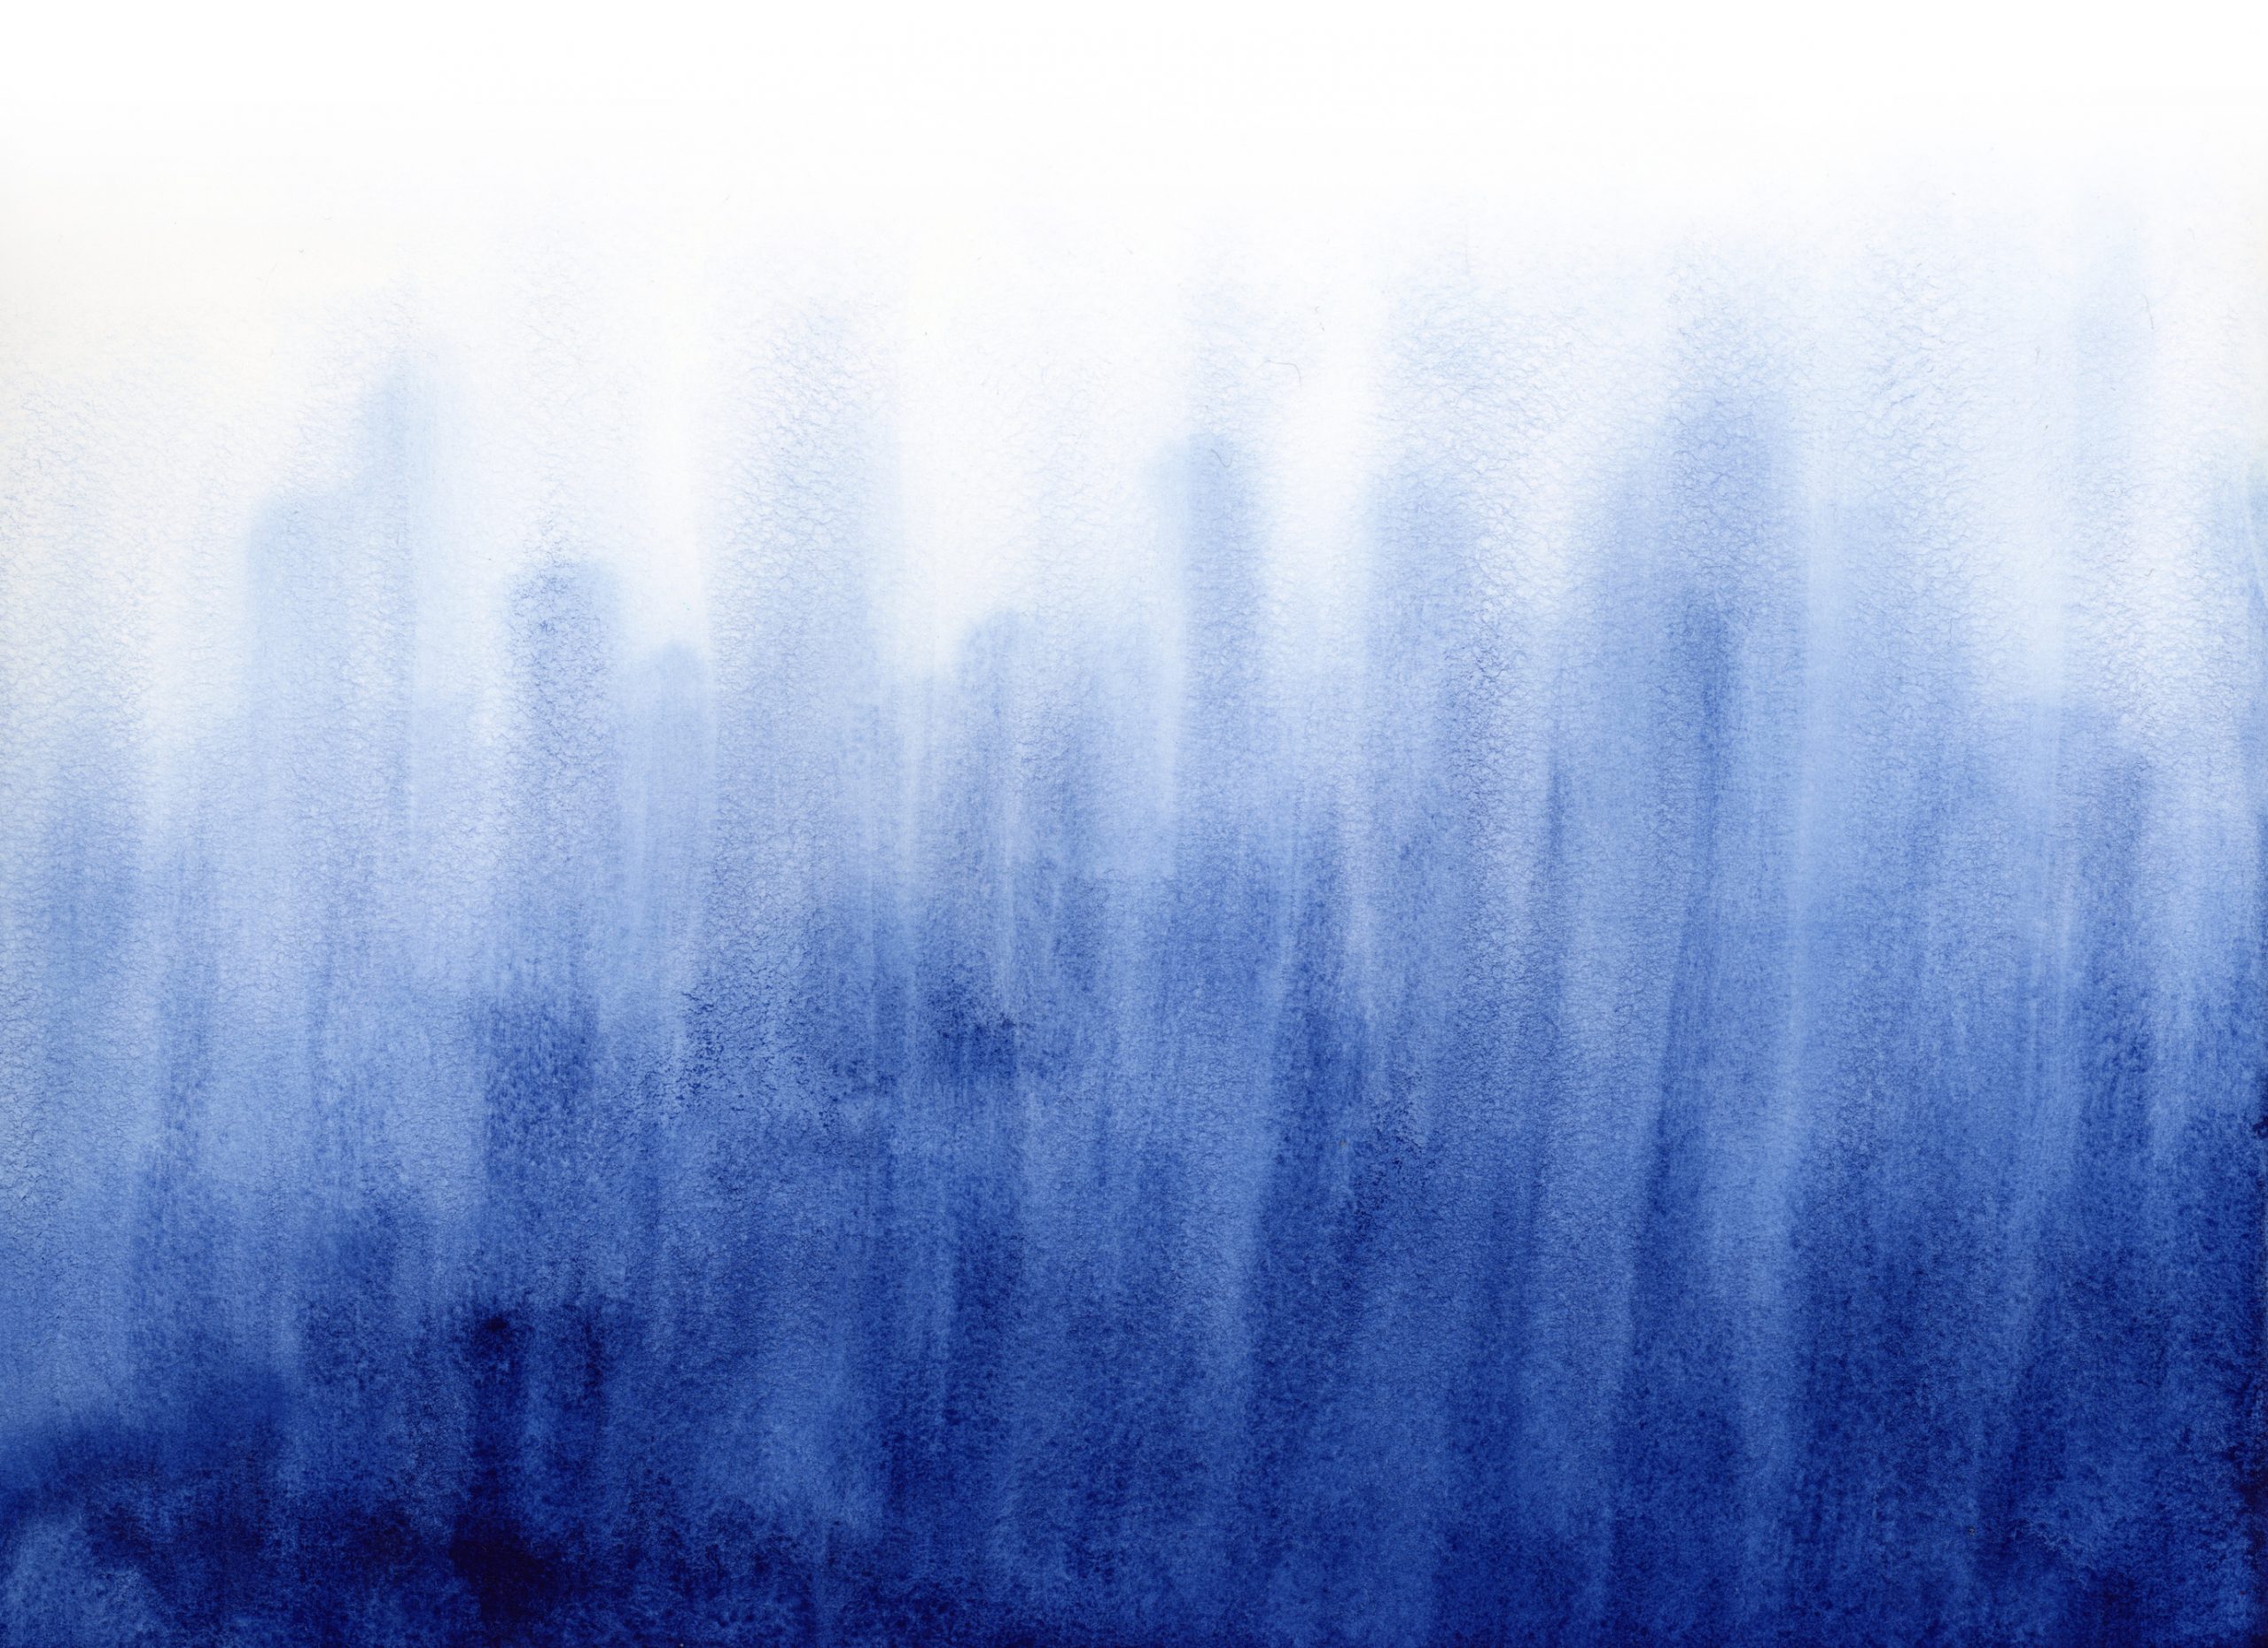 Deep blue abstract watercolor painting